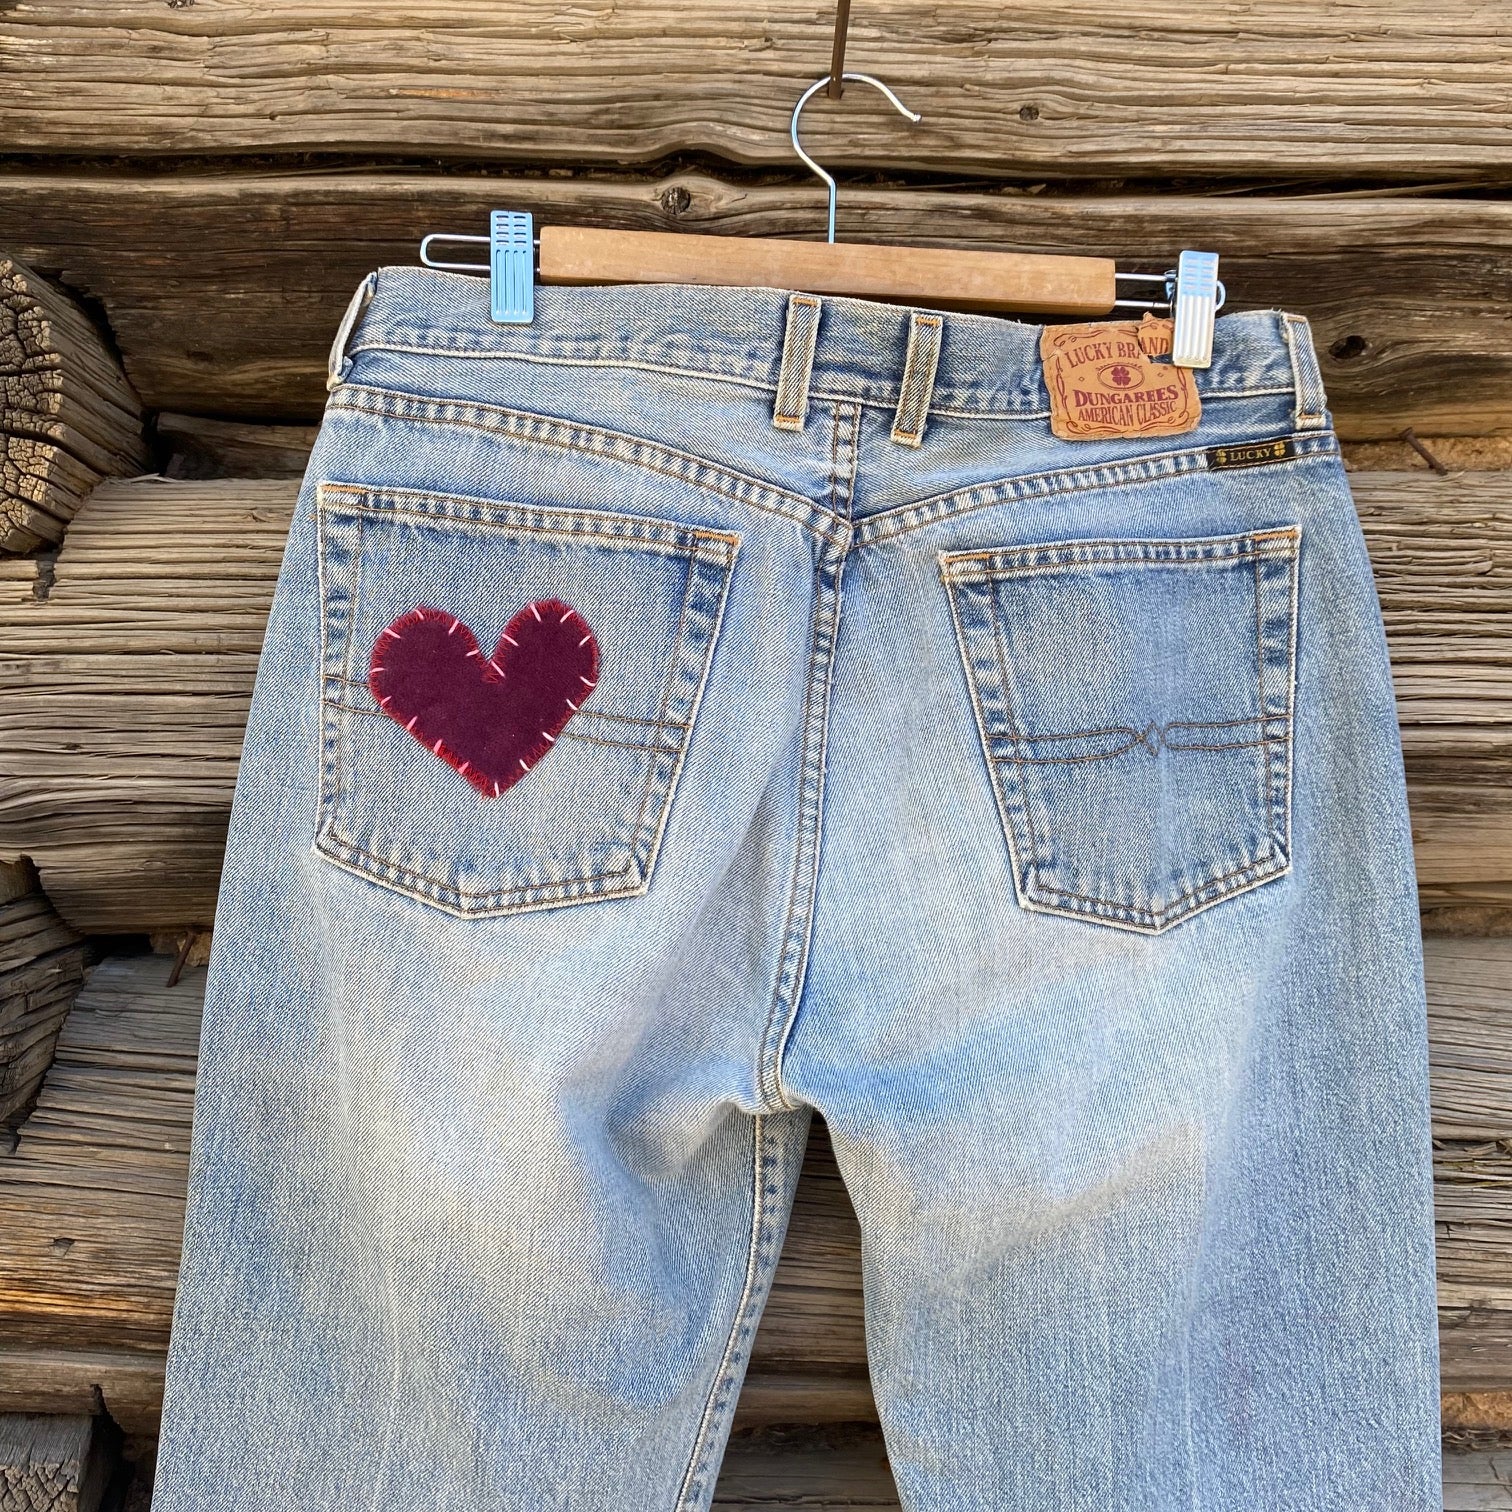 Tessa Hand Me Downs Upcycled Jeans Lucky Brand size 32 – Tessa